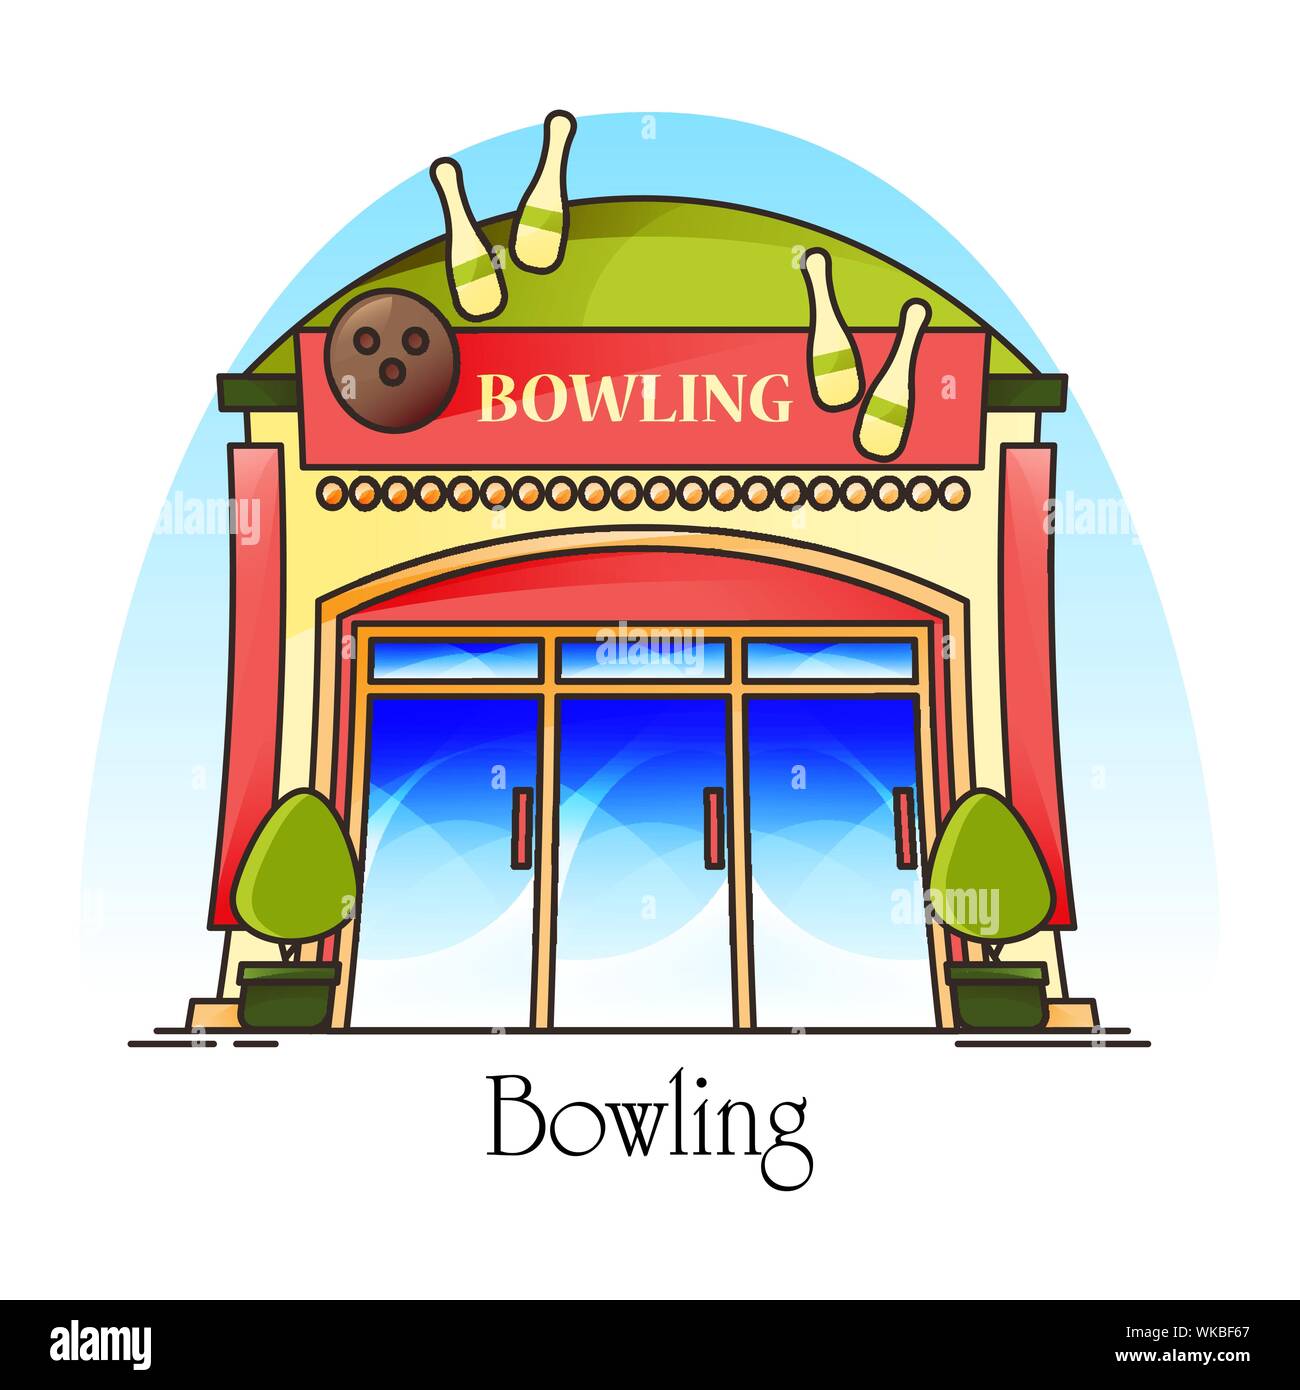 Bowling club or house. Facade or front view Stock Vector